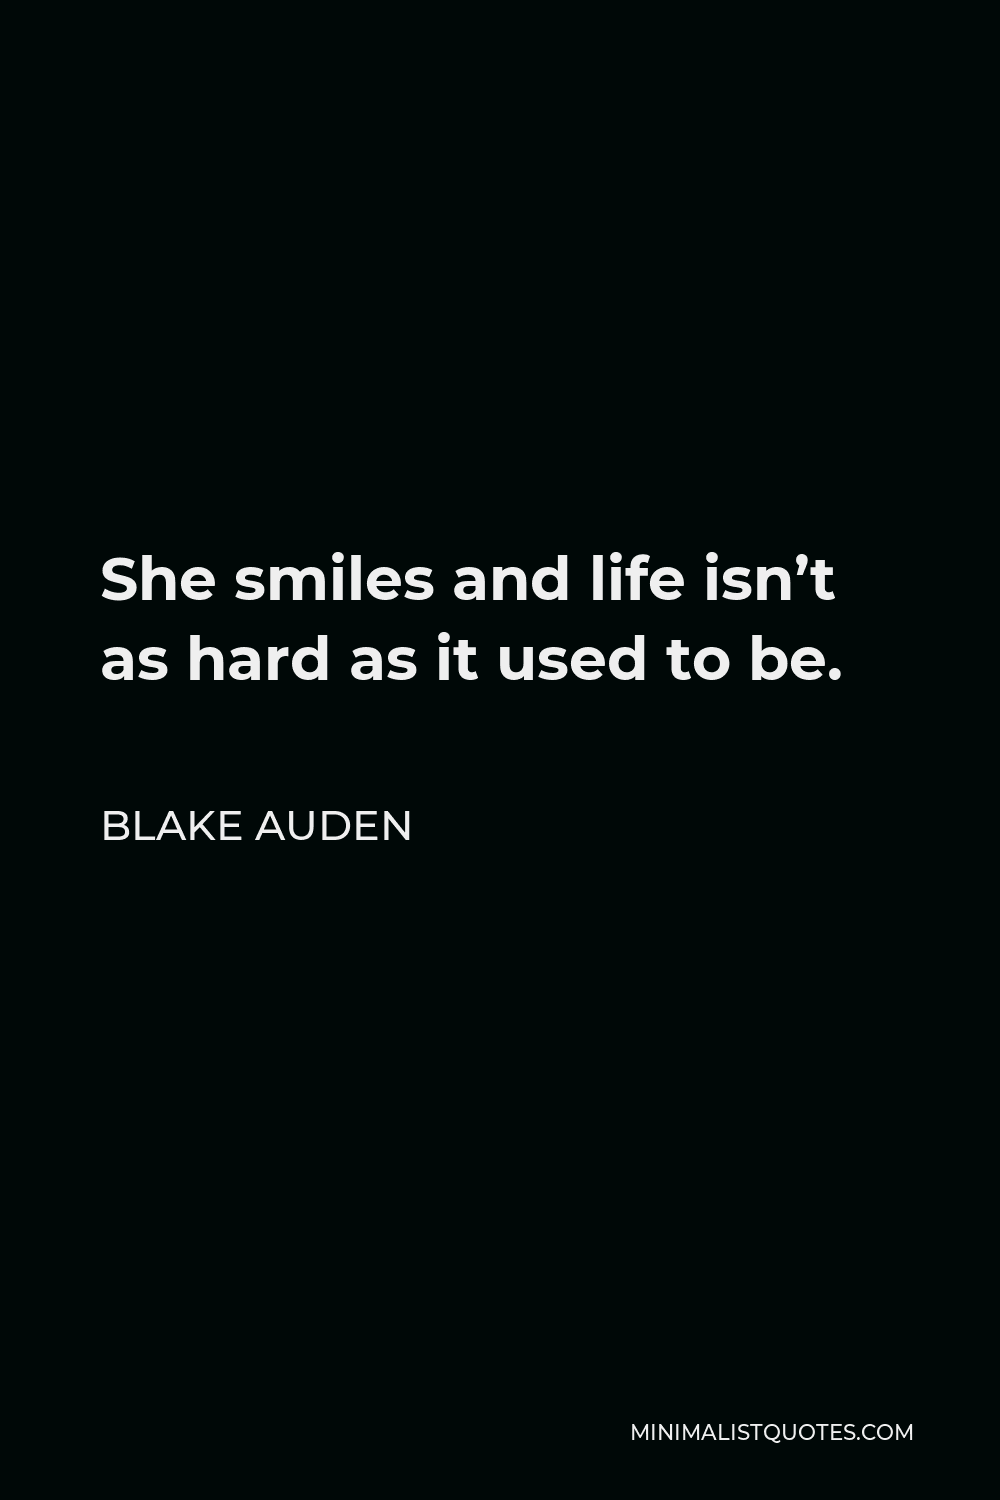 Blake Auden Quote - She smiles and life isn’t as hard as it used to be.